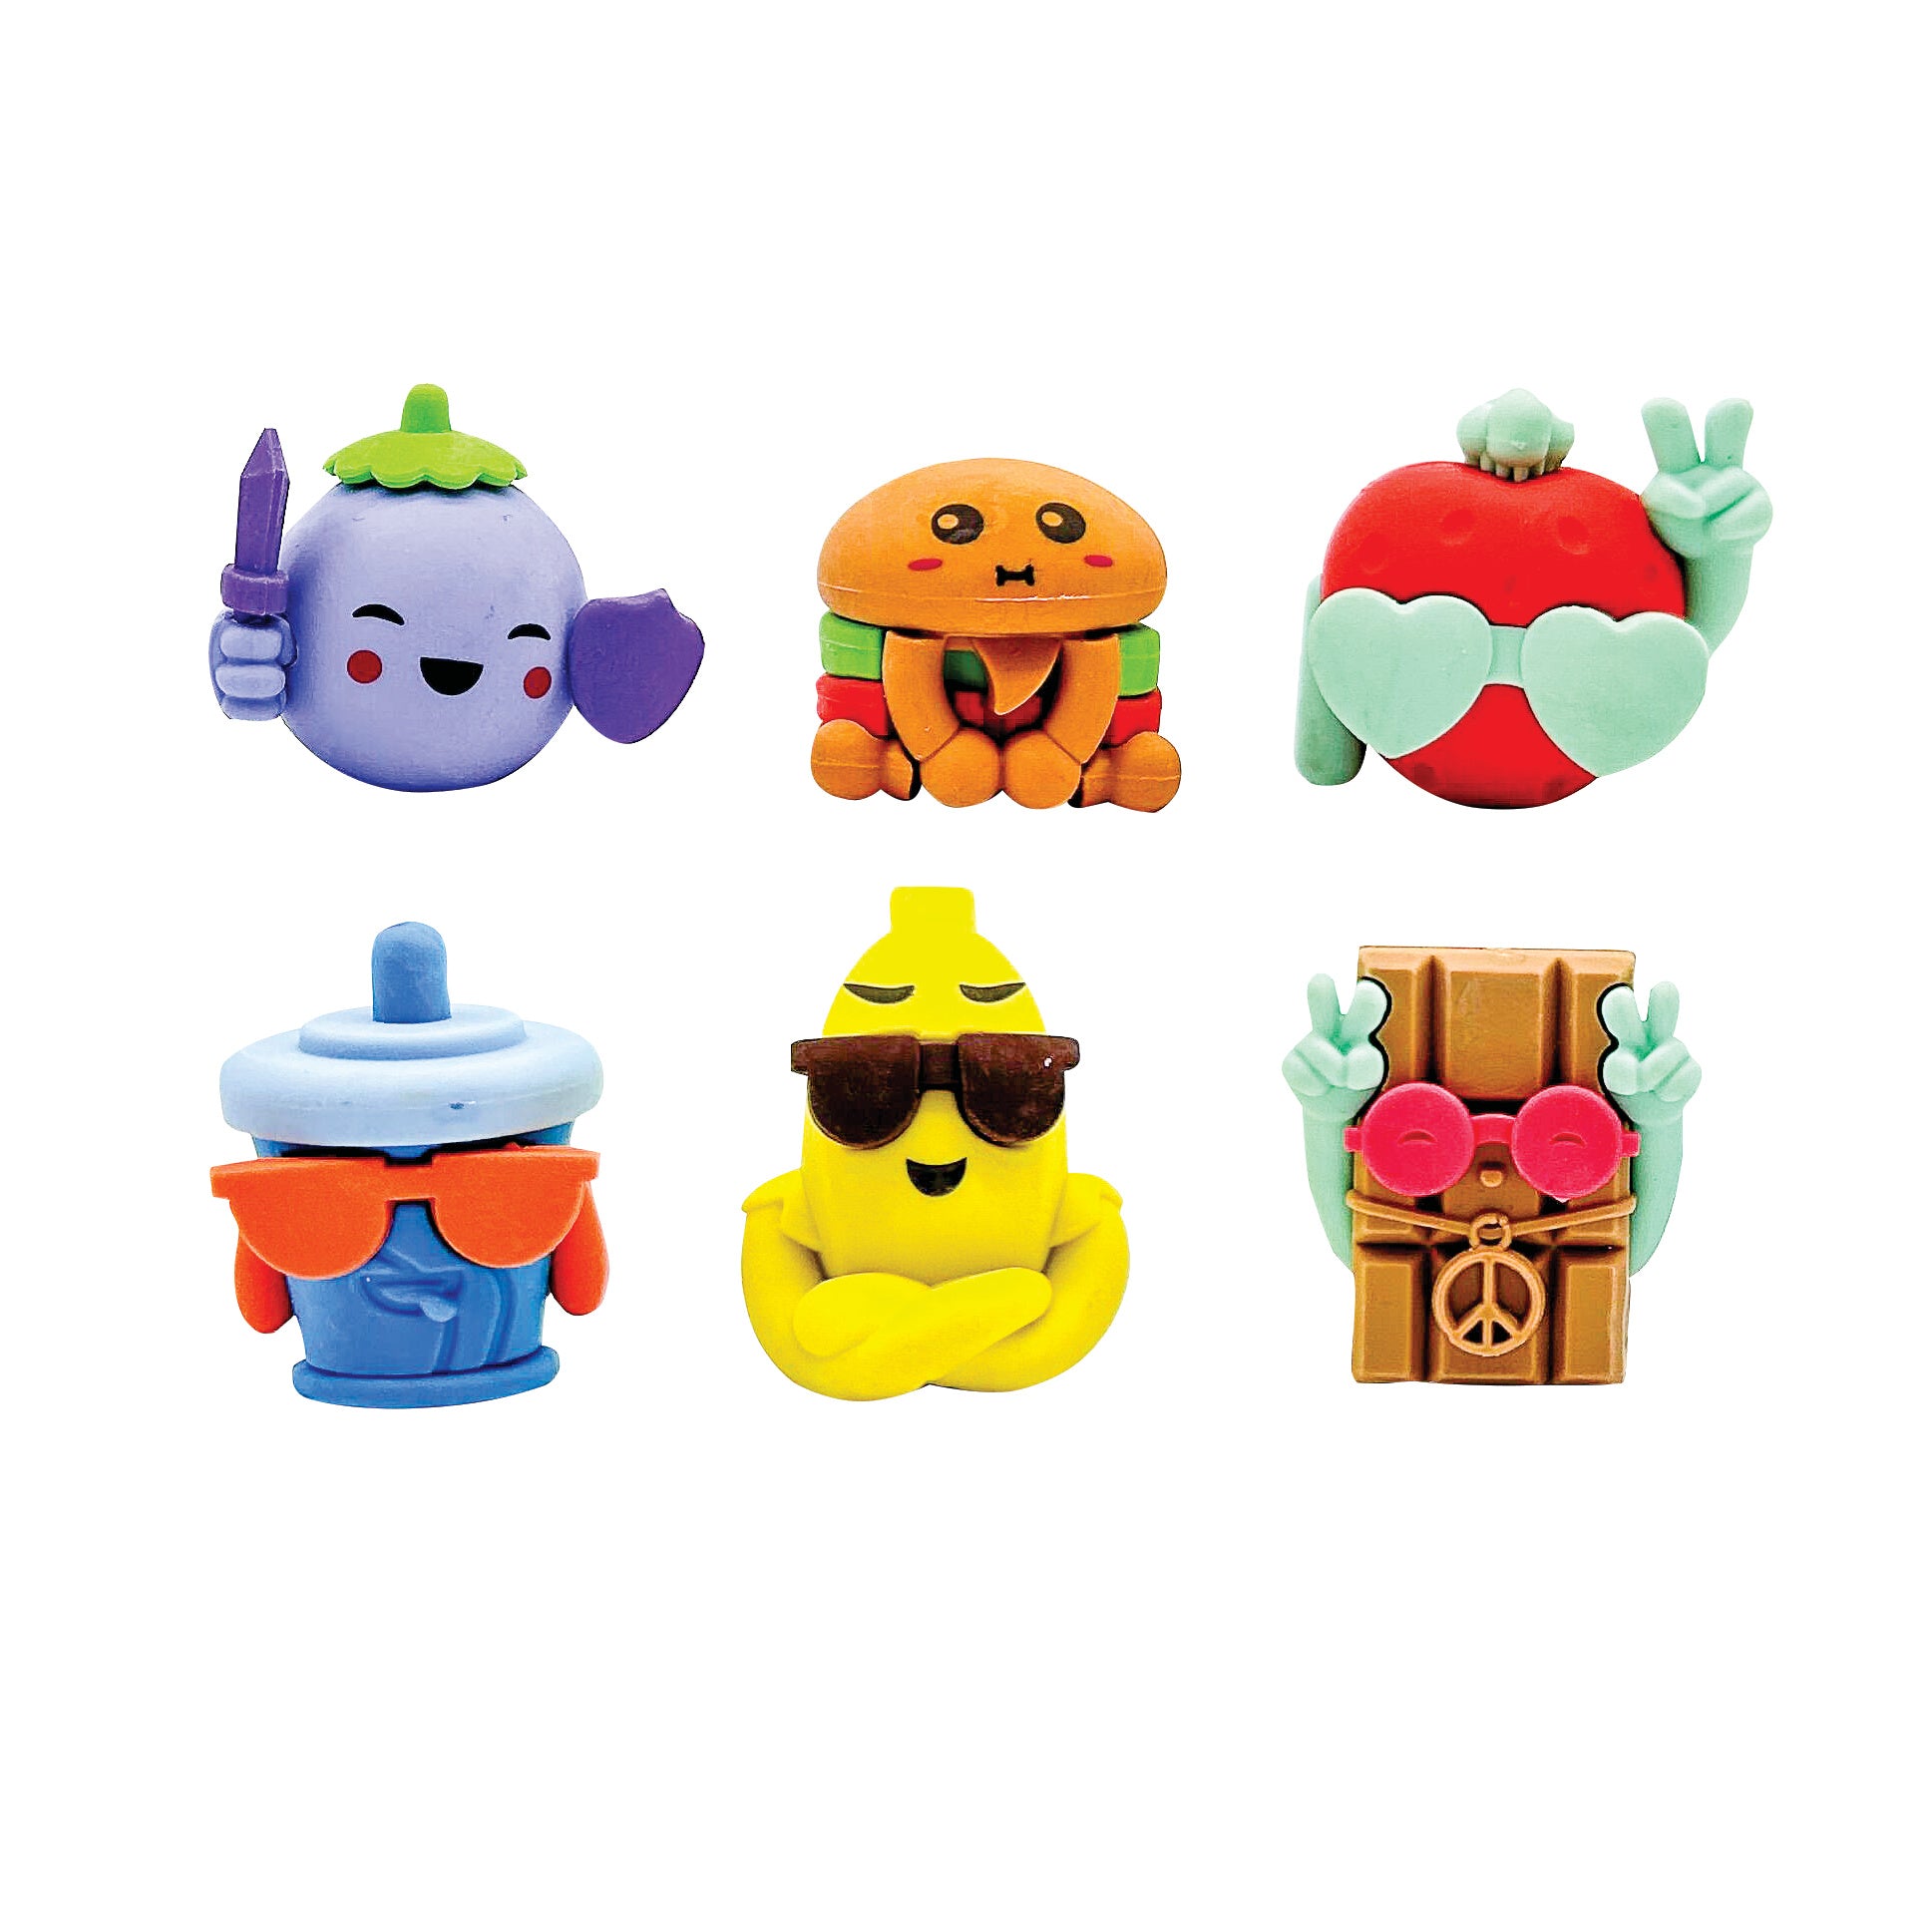 Snack Attack Cool Guys 3D Eraser Toppers